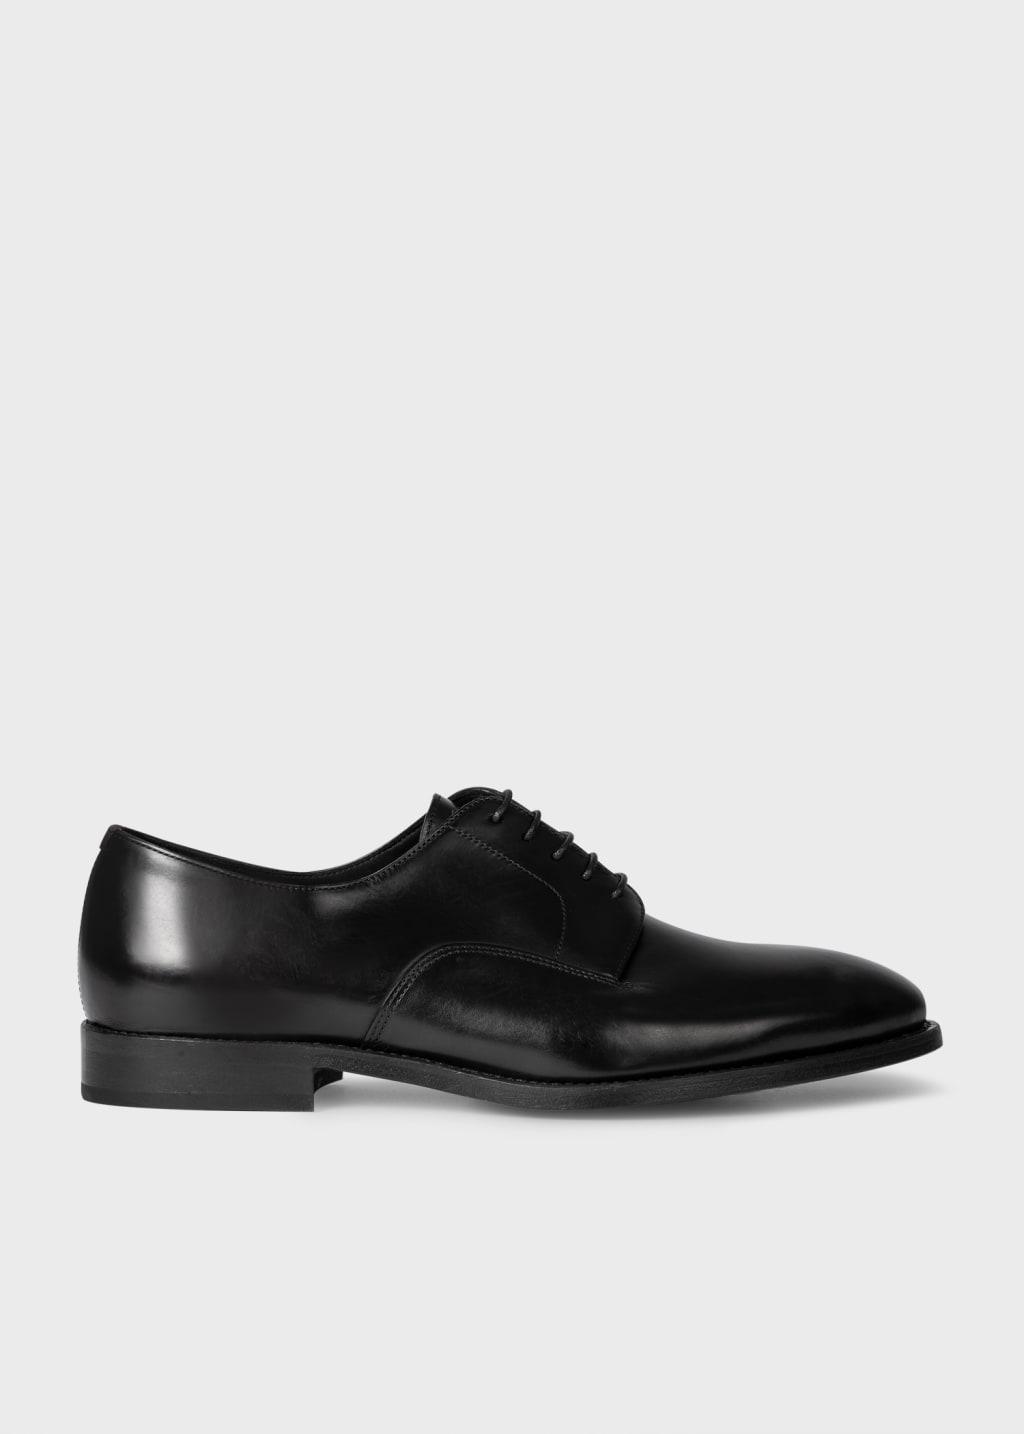 Front View - Black Leather 'Fes' Shoes Paul Smith